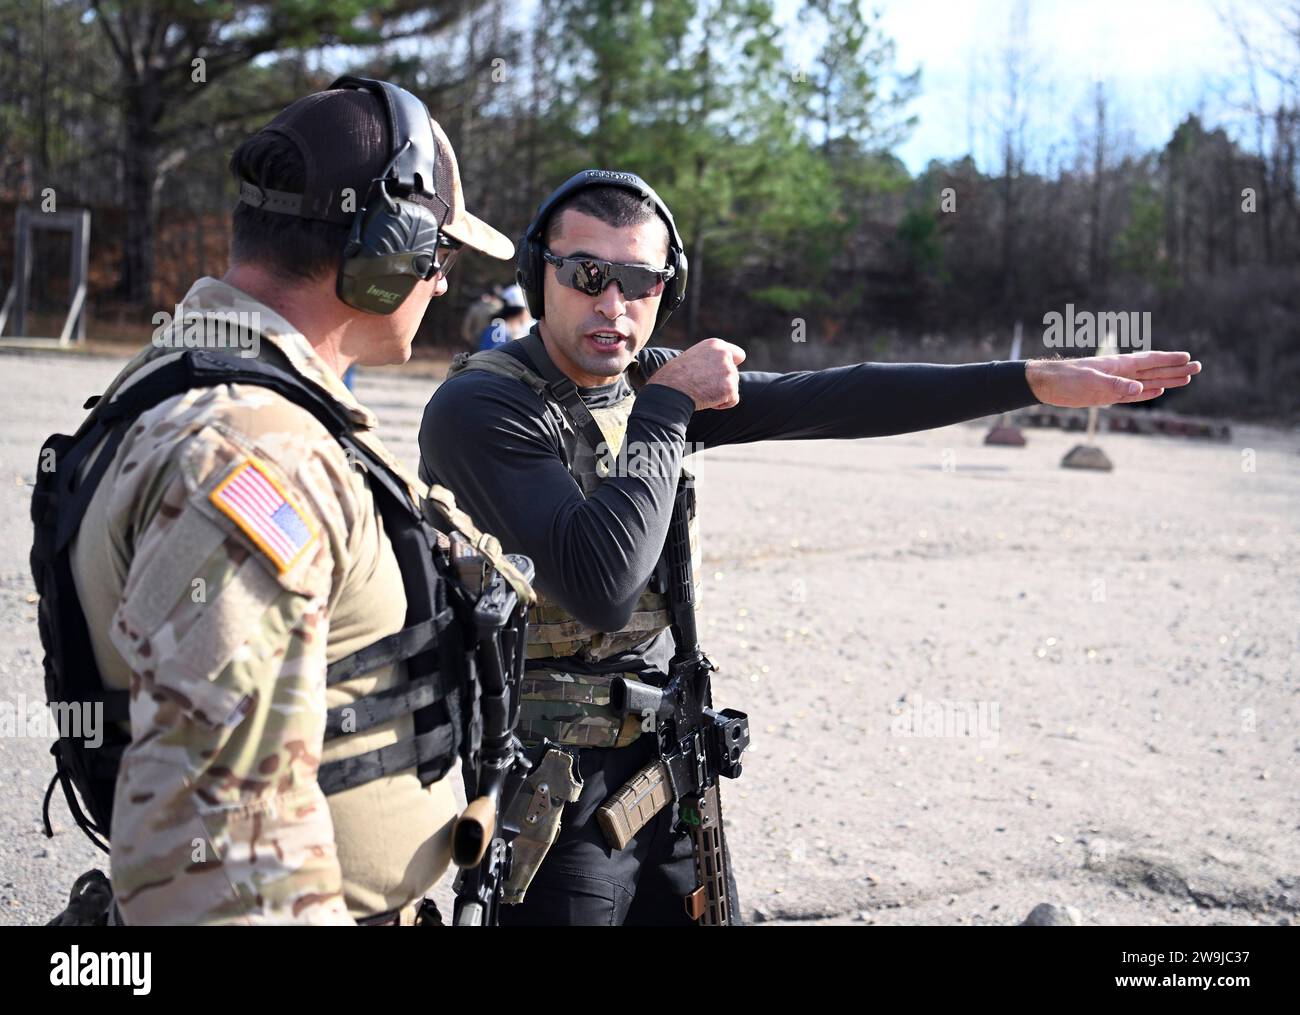 Fayetteville, United States of America. 13 December, 2023. Mixed Martial Artist Khonry Gracie, right, discusses aiming with a Green Beret instructor during practice prior to participating in the 2023 Green Beret Celebrity Tactical Challenge at the U.S. Army John F. Kennedy Special Warfare Center Miller Training Complex of Fort Liberty, December 13, 2023 Fayetteville, North Carolina. Fourteen celebrities teamed up with Green Berets to take part in the annual shooting event.  Credit: K. Kassens/US Army Photo/Alamy Live News Stock Photo